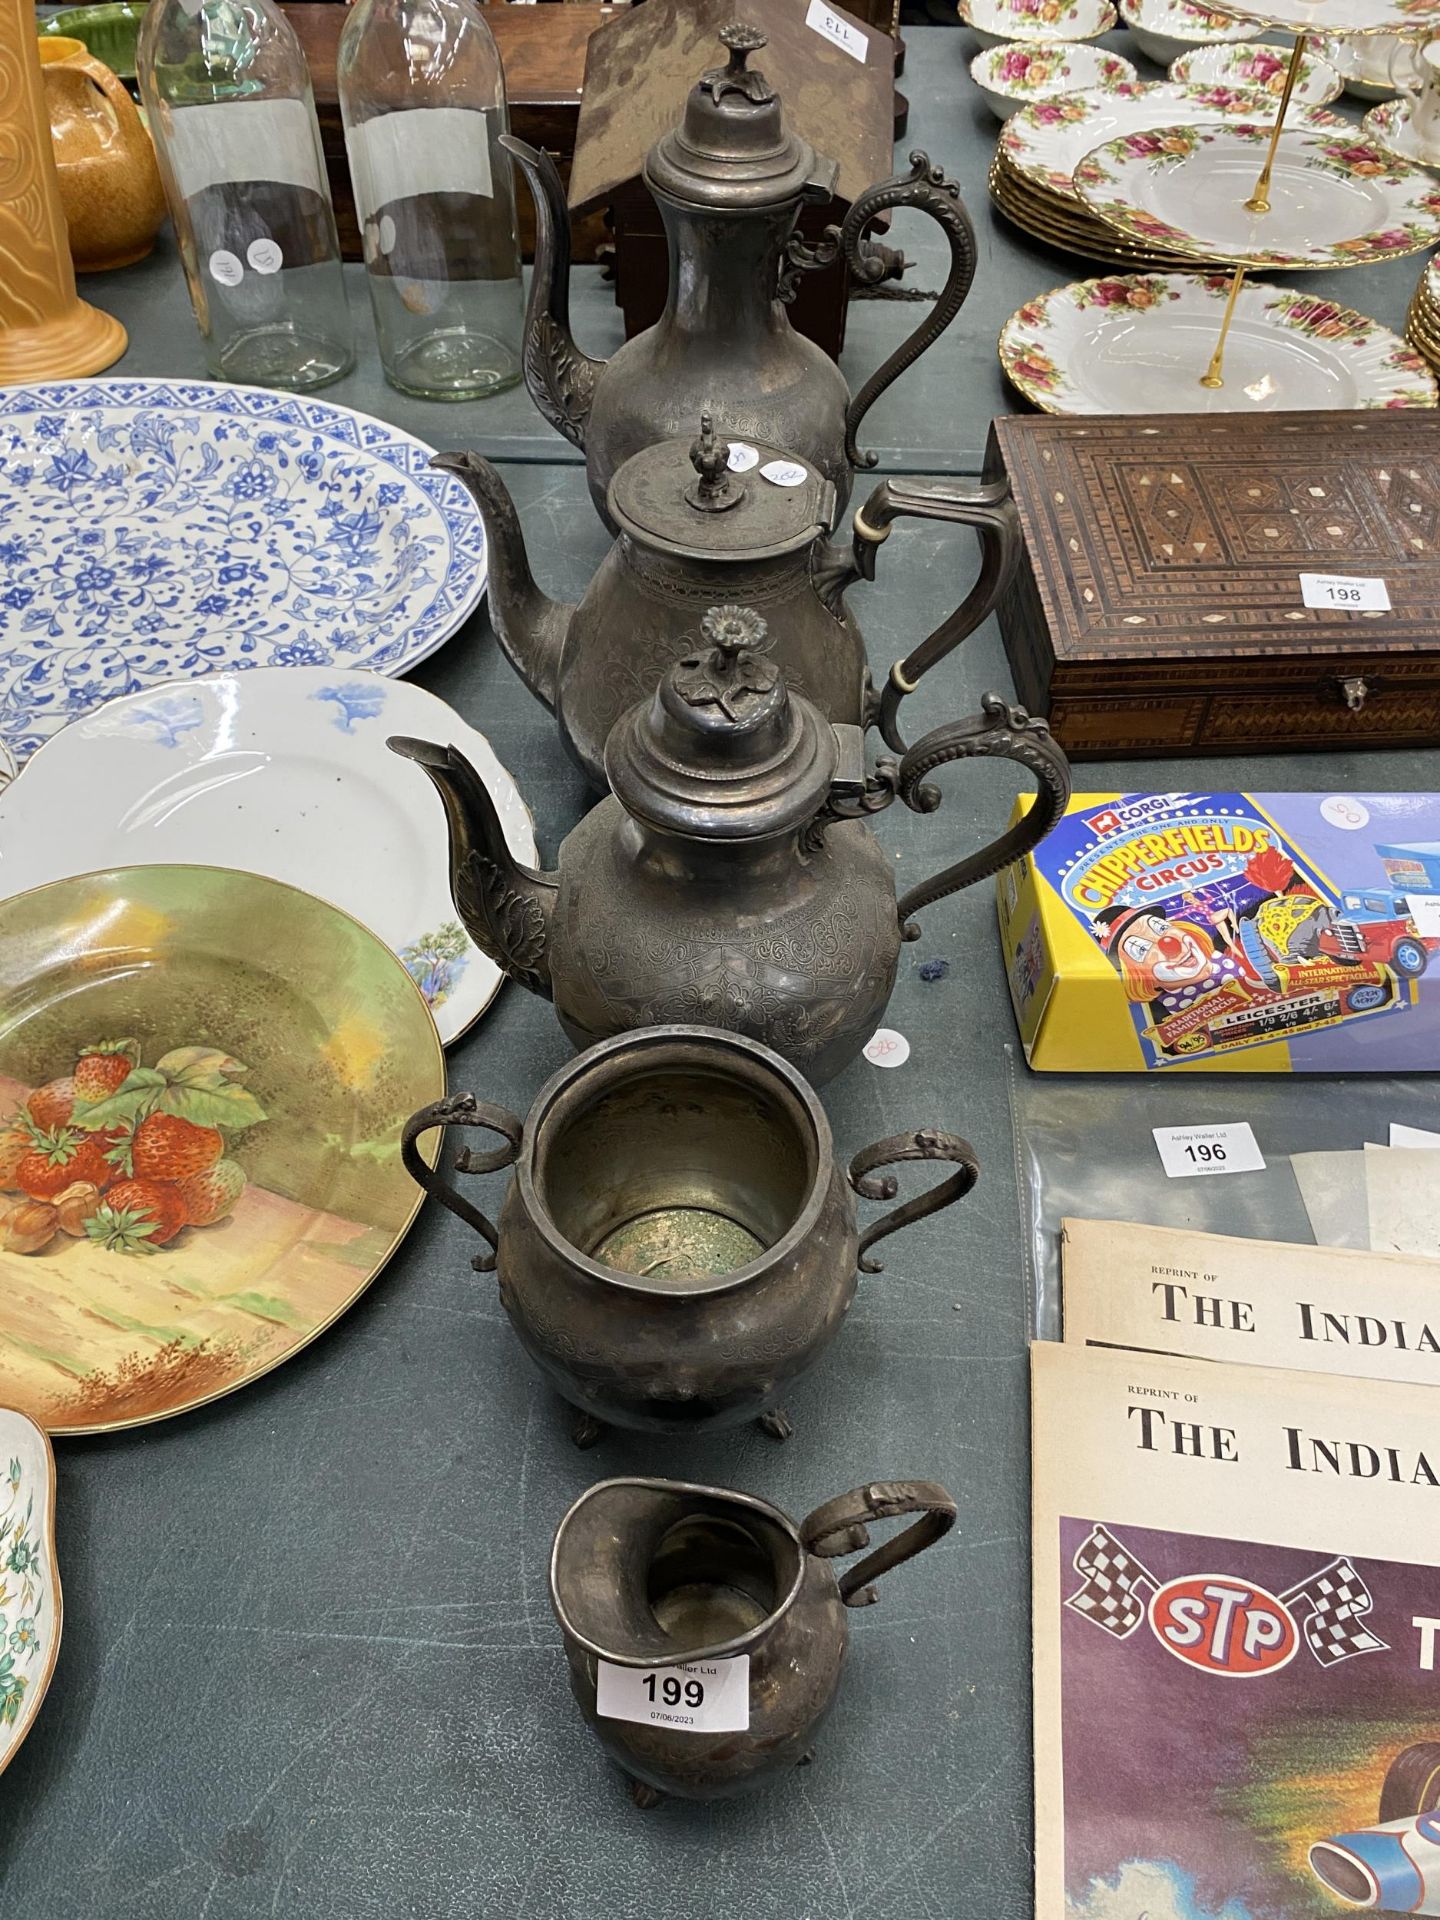 A PEWTER TEASET TO INCLUDE A COFFEE POT, TEAPOTS, CREAM JUG AND SUGAR BOWL - 5 PIECES IN TOTAL